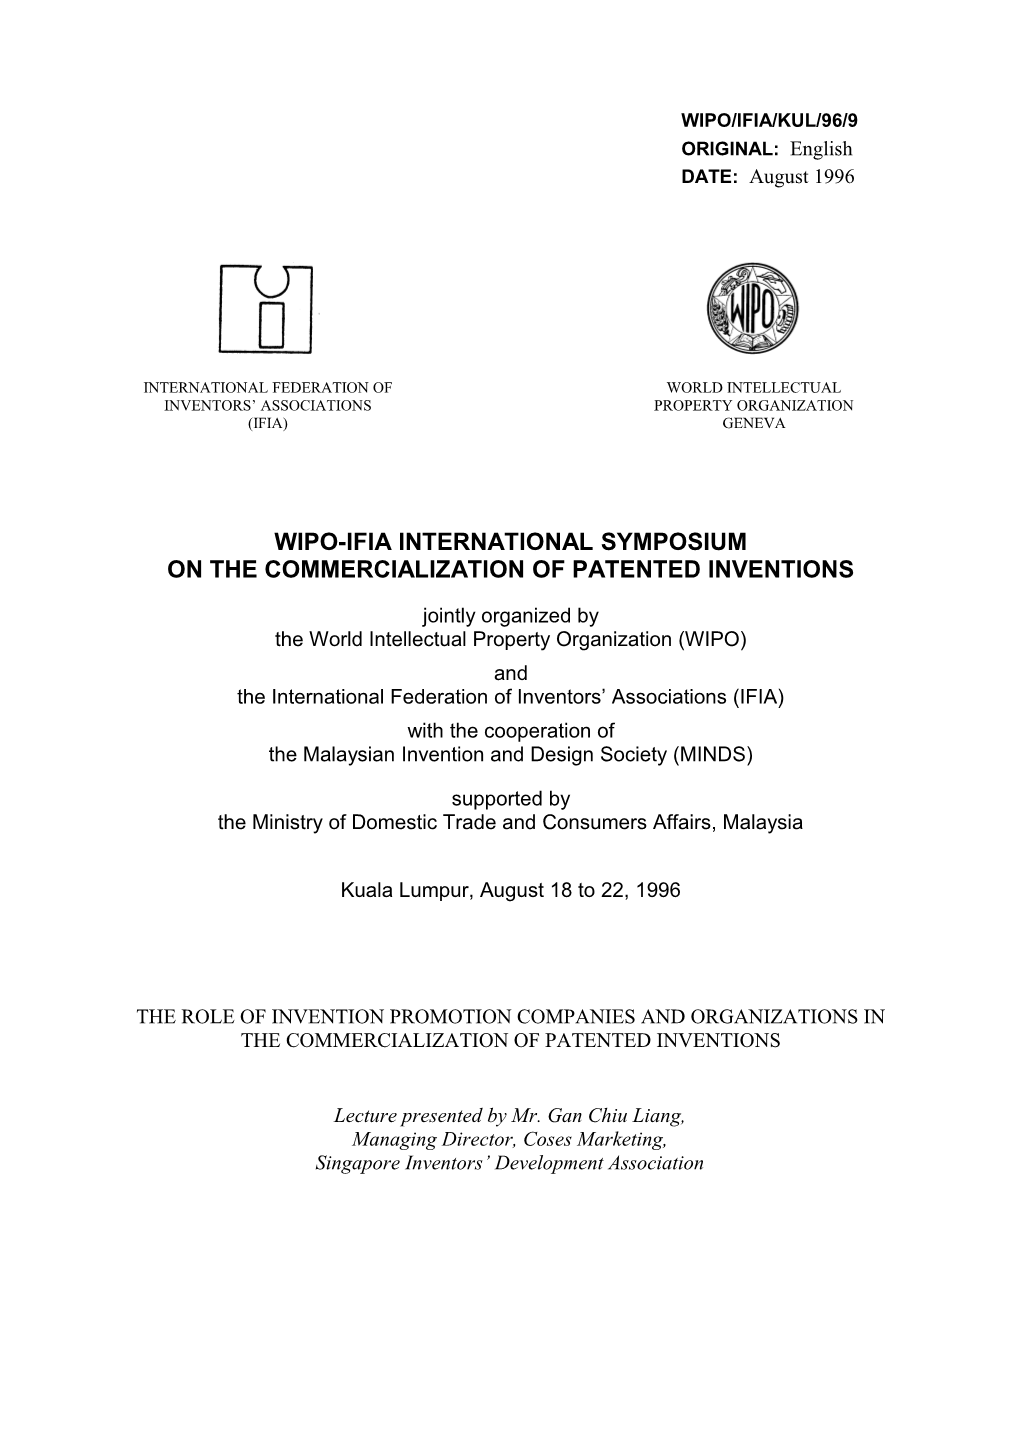 WIPO/IFIA/KUL/96/9: the Role of Invention Promotion Companies and Organizations in The